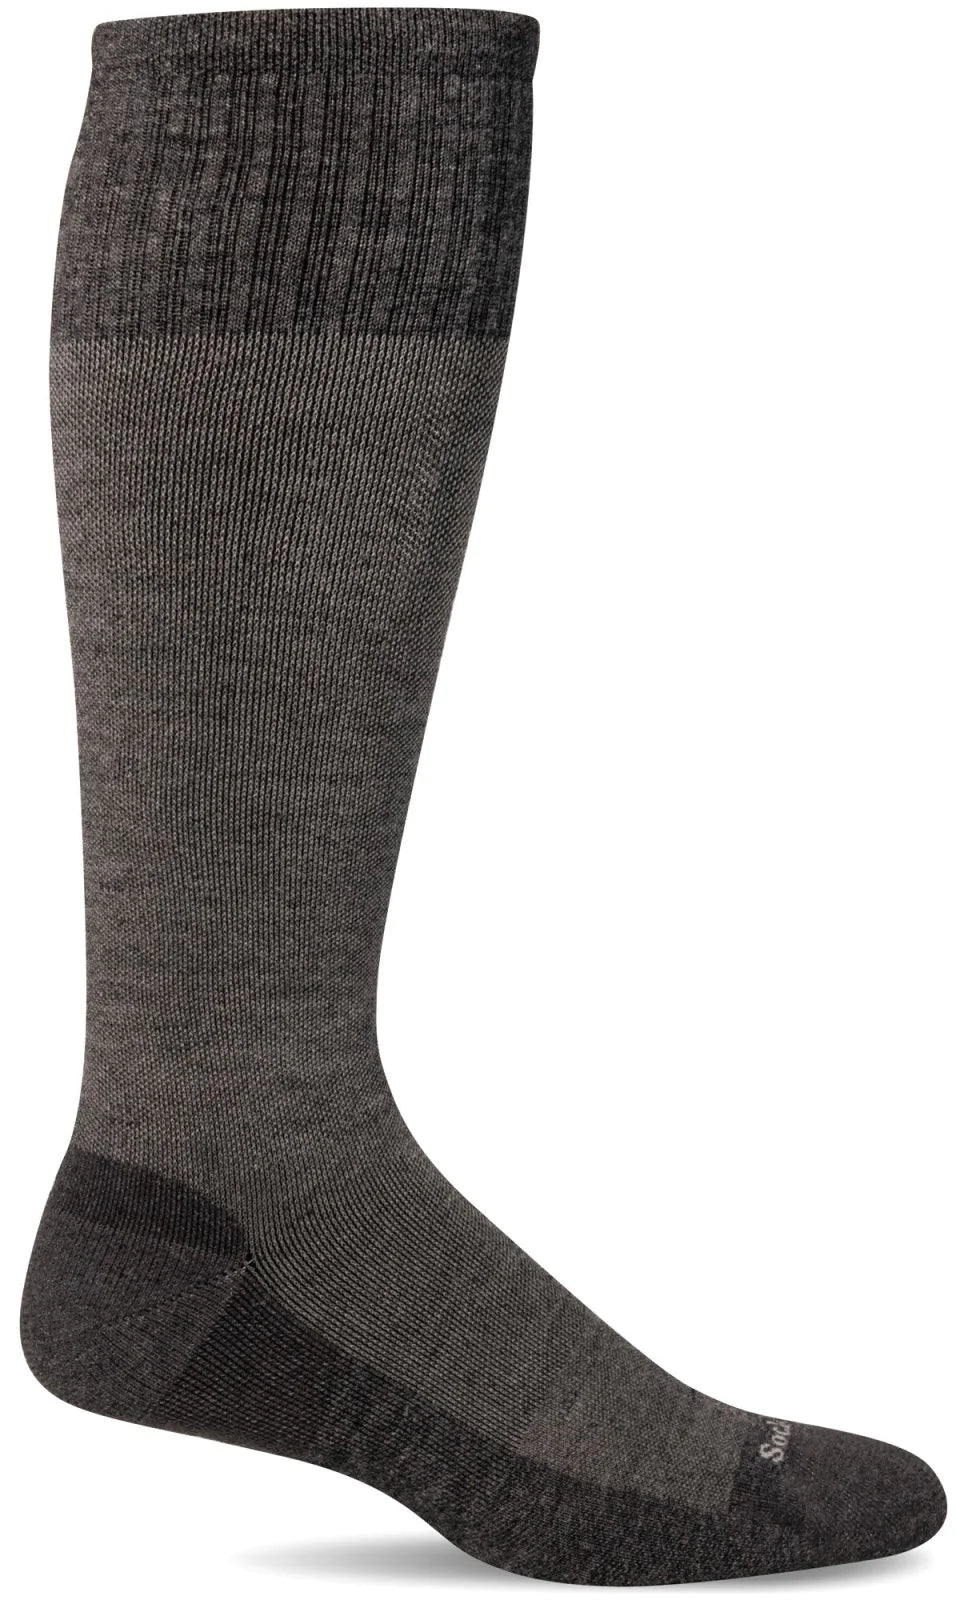 The Basic Men's Bamboo/Merino Moderate Compression Socks in Khaki or Charcoal